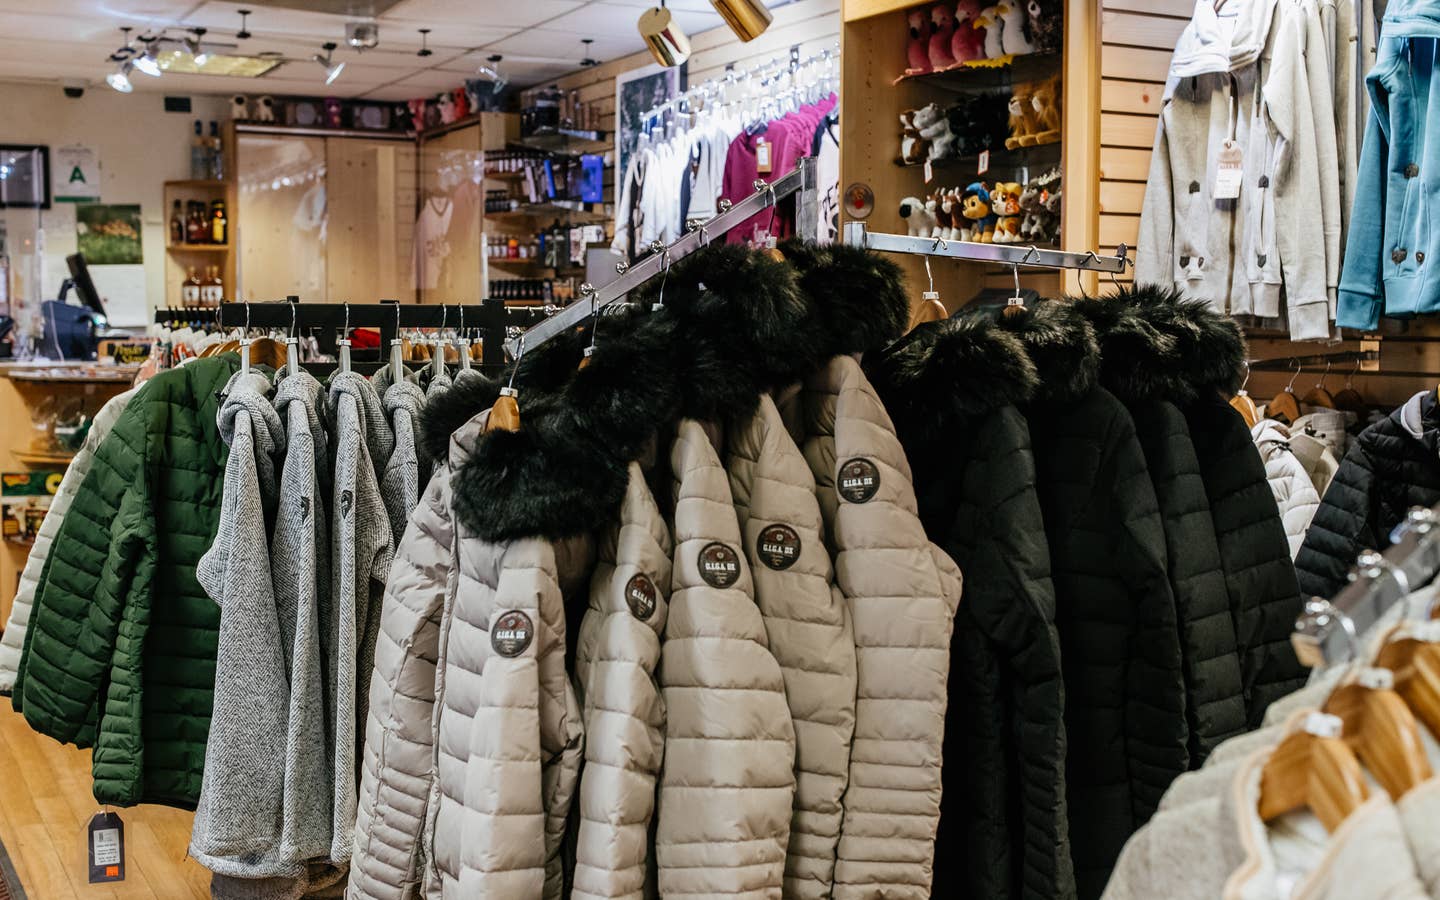 Rack of winter coats at the Marketplace at Tahoe Ridge Resort in Stateline, Nevada.